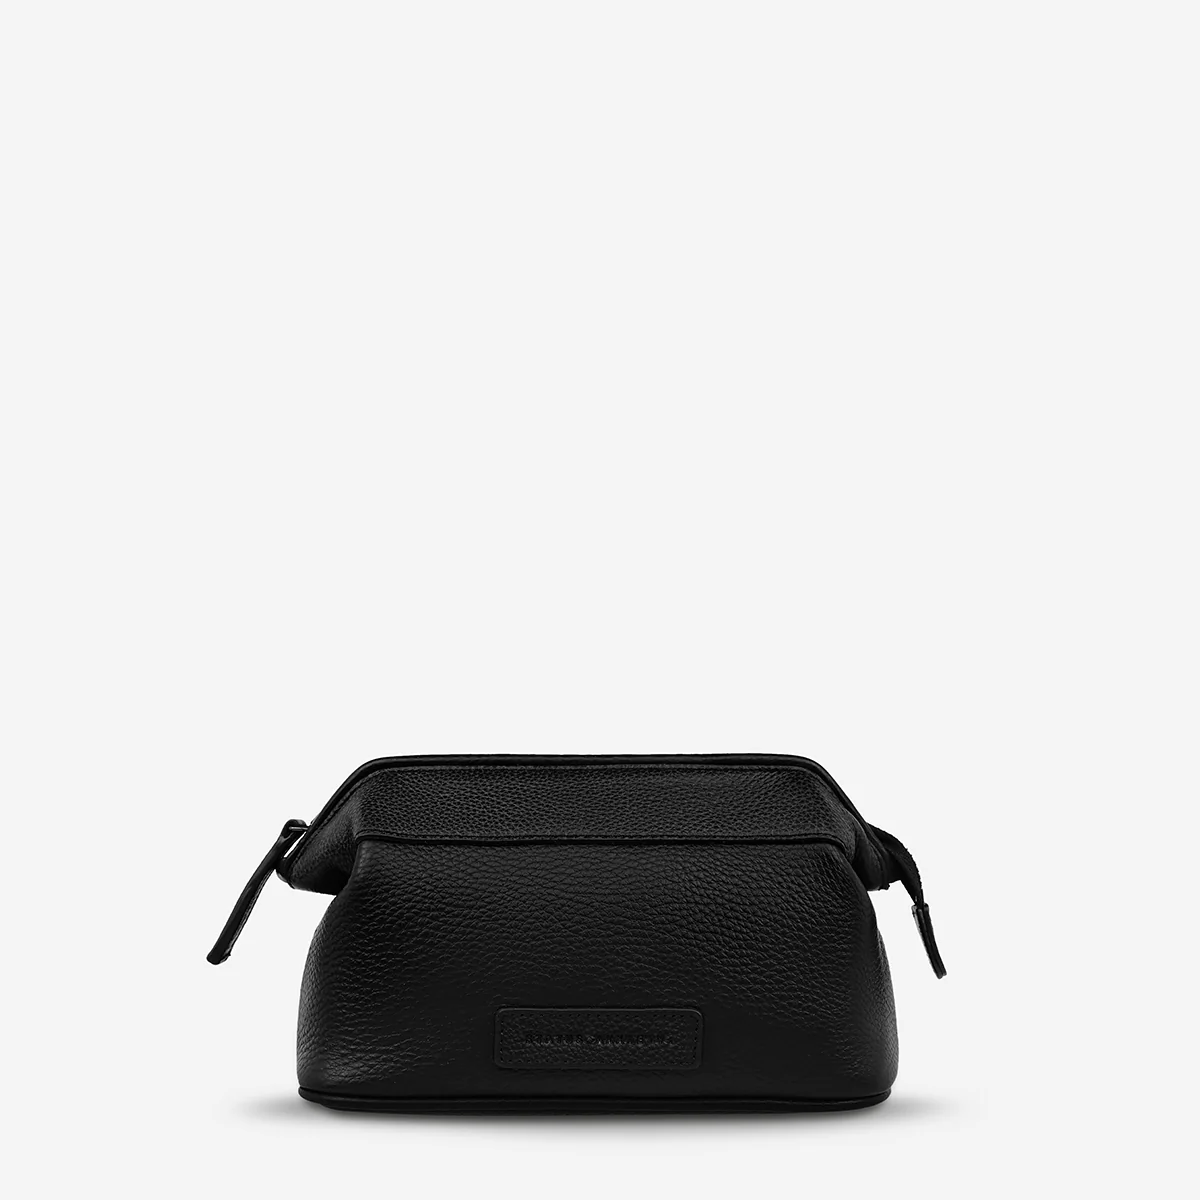 status-anxiety-toiletries-bag-thinking-of-a-place-black-front.webp